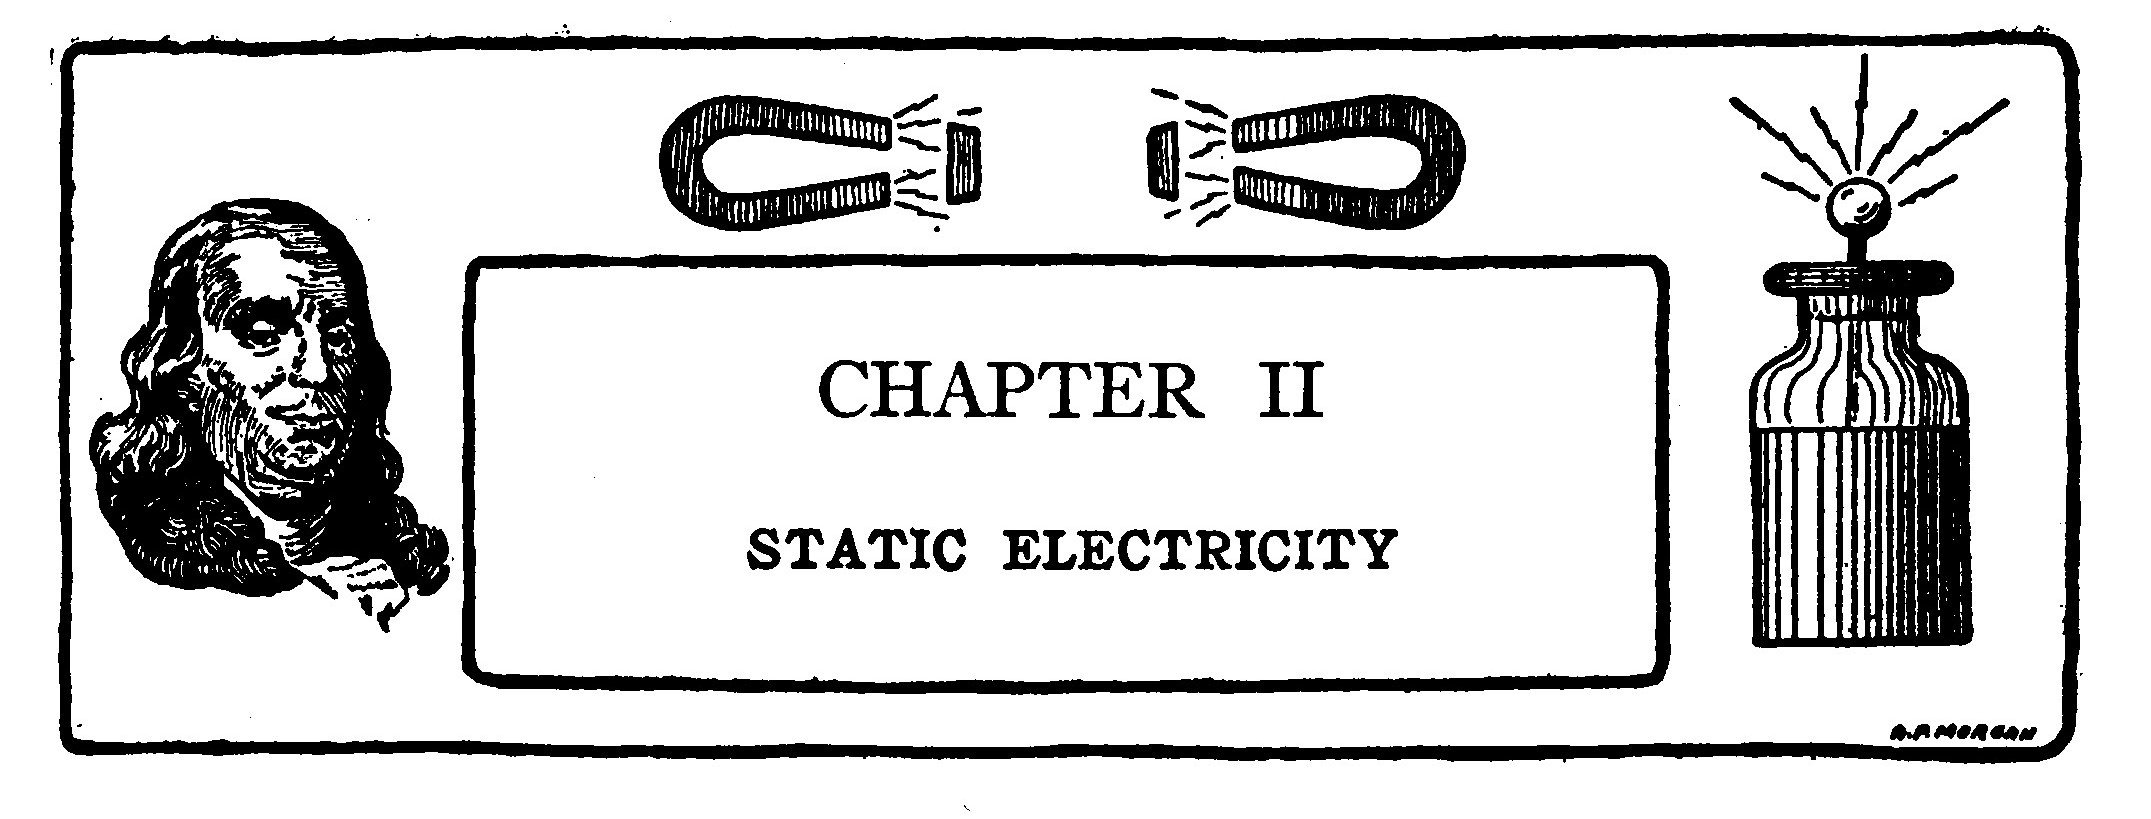 CHAPTER II STATIC ELECTRICITY